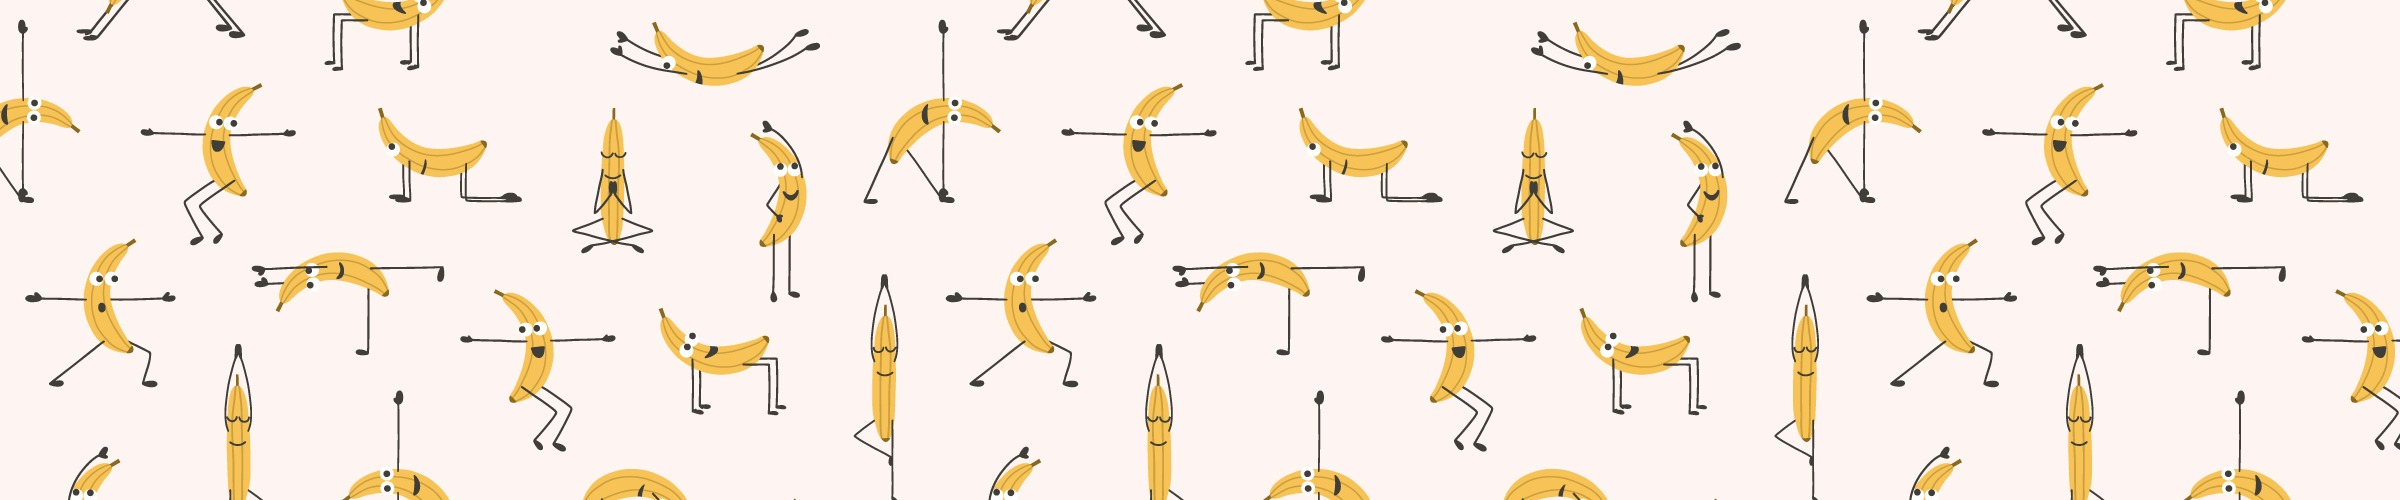 Playful pattern design of a banana character doing different yoga poses